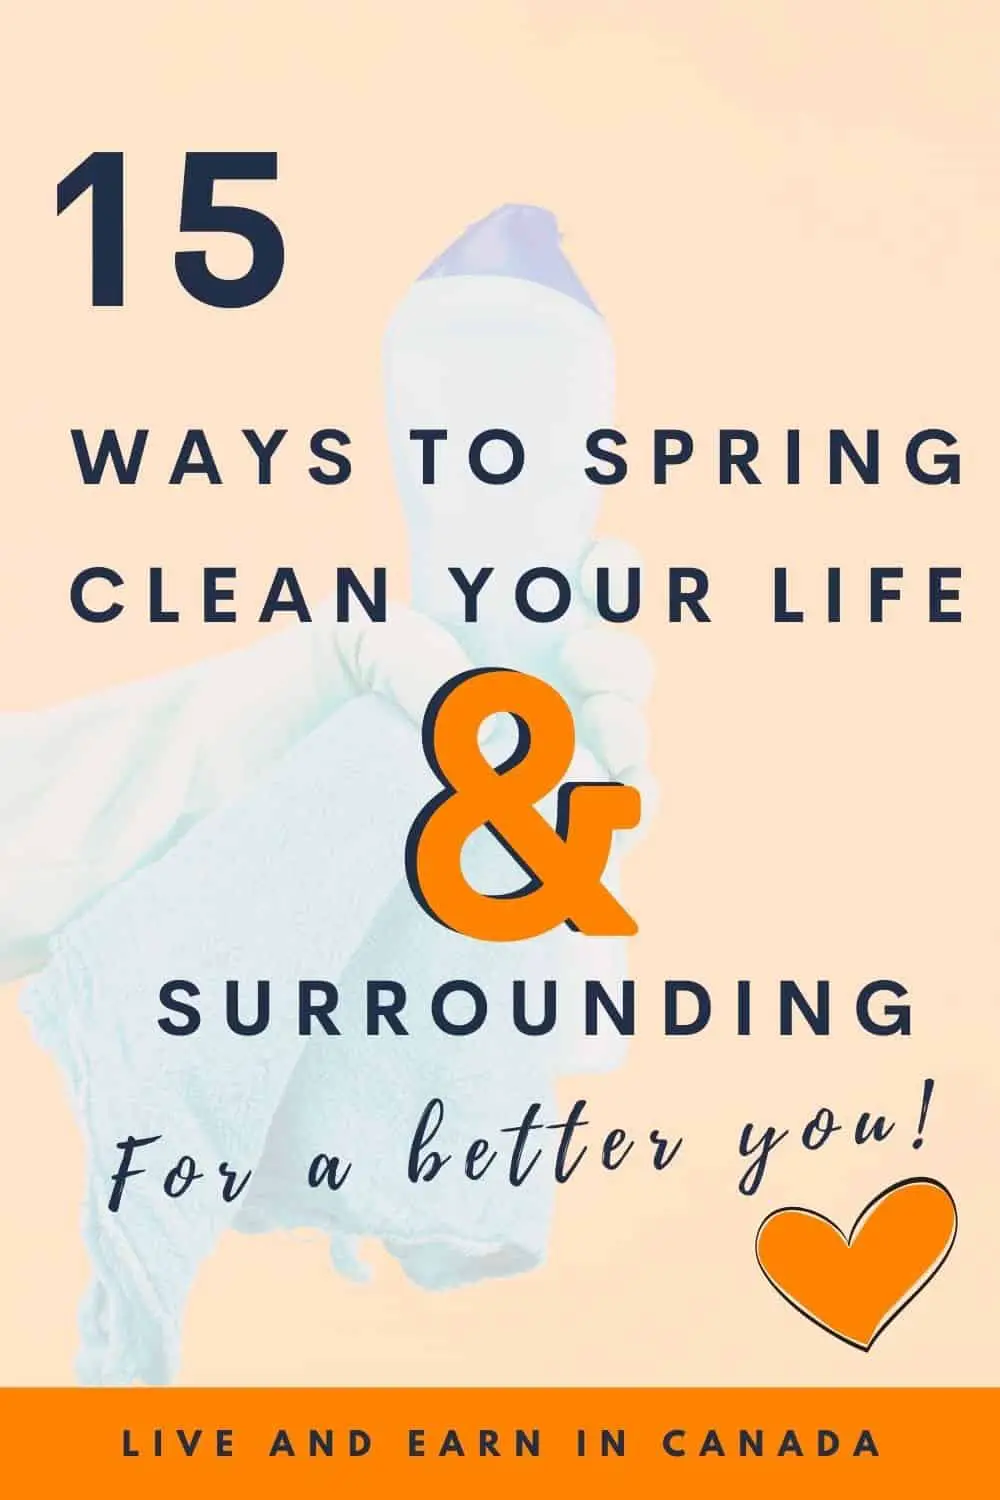 15 Healthy Ways to Spring Clean Your Life Is your life cluttered and messy? It's time to get spring cleaning. Click here to learn how to spring clean your life, from your house to your thoughts. Plus, get the FREE Spring Clean Your Mind Checklist. #SpringCleaning #SpringClean #OrganizeMyLife #Declutter #ClutterFree #Organization #Organized #Organizing #Spring #Minimal #Minimalism #Minimalist #PositiveLife #Mindful #MindfulLiving #Positive #PositiveVibes #Positivity #MentalHealth #MillennialBlogger